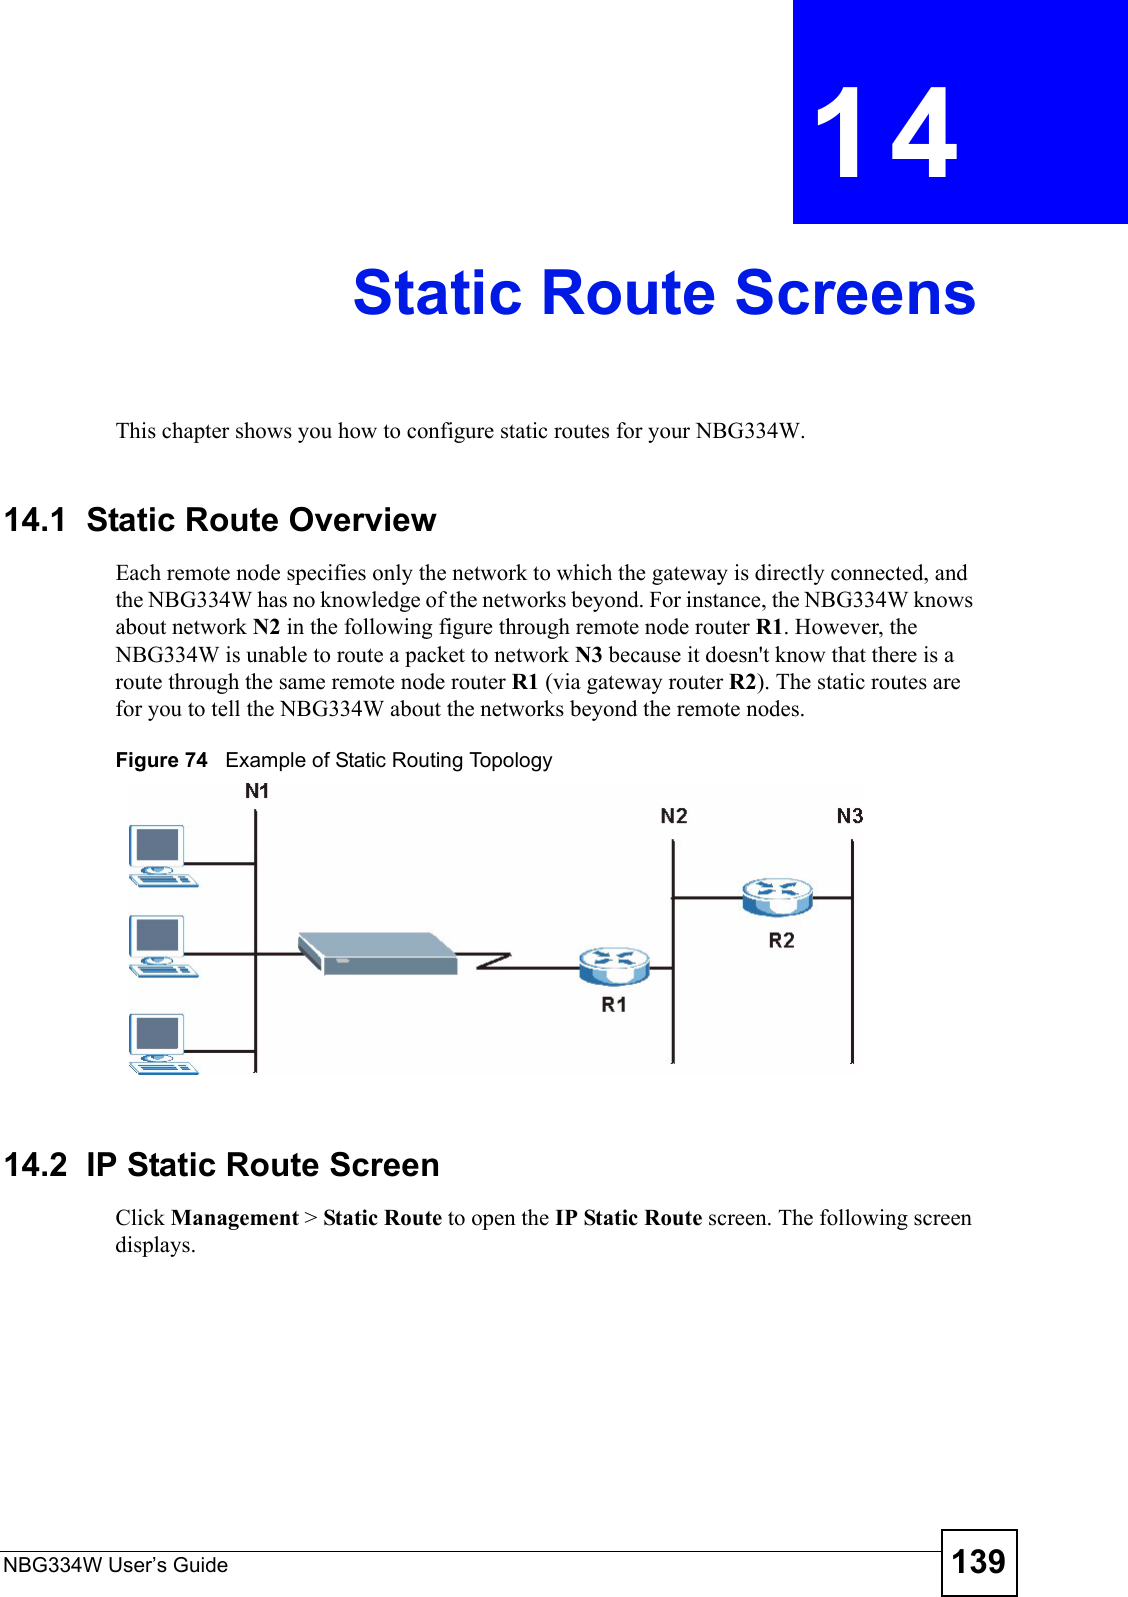 NBG334W User’s Guide 139CHAPTER  14 Static Route ScreensThis chapter shows you how to configure static routes for your NBG334W.14.1  Static Route OverviewEach remote node specifies only the network to which the gateway is directly connected, and the NBG334W has no knowledge of the networks beyond. For instance, the NBG334W knows about network N2 in the following figure through remote node router R1. However, the NBG334W is unable to route a packet to network N3 because it doesn&apos;t know that there is a route through the same remote node router R1 (via gateway router R2). The static routes are for you to tell the NBG334W about the networks beyond the remote nodes.Figure 74   Example of Static Routing Topology14.2  IP Static Route ScreenClick Management &gt; Static Route to open the IP Static Route screen. The following screen displays.